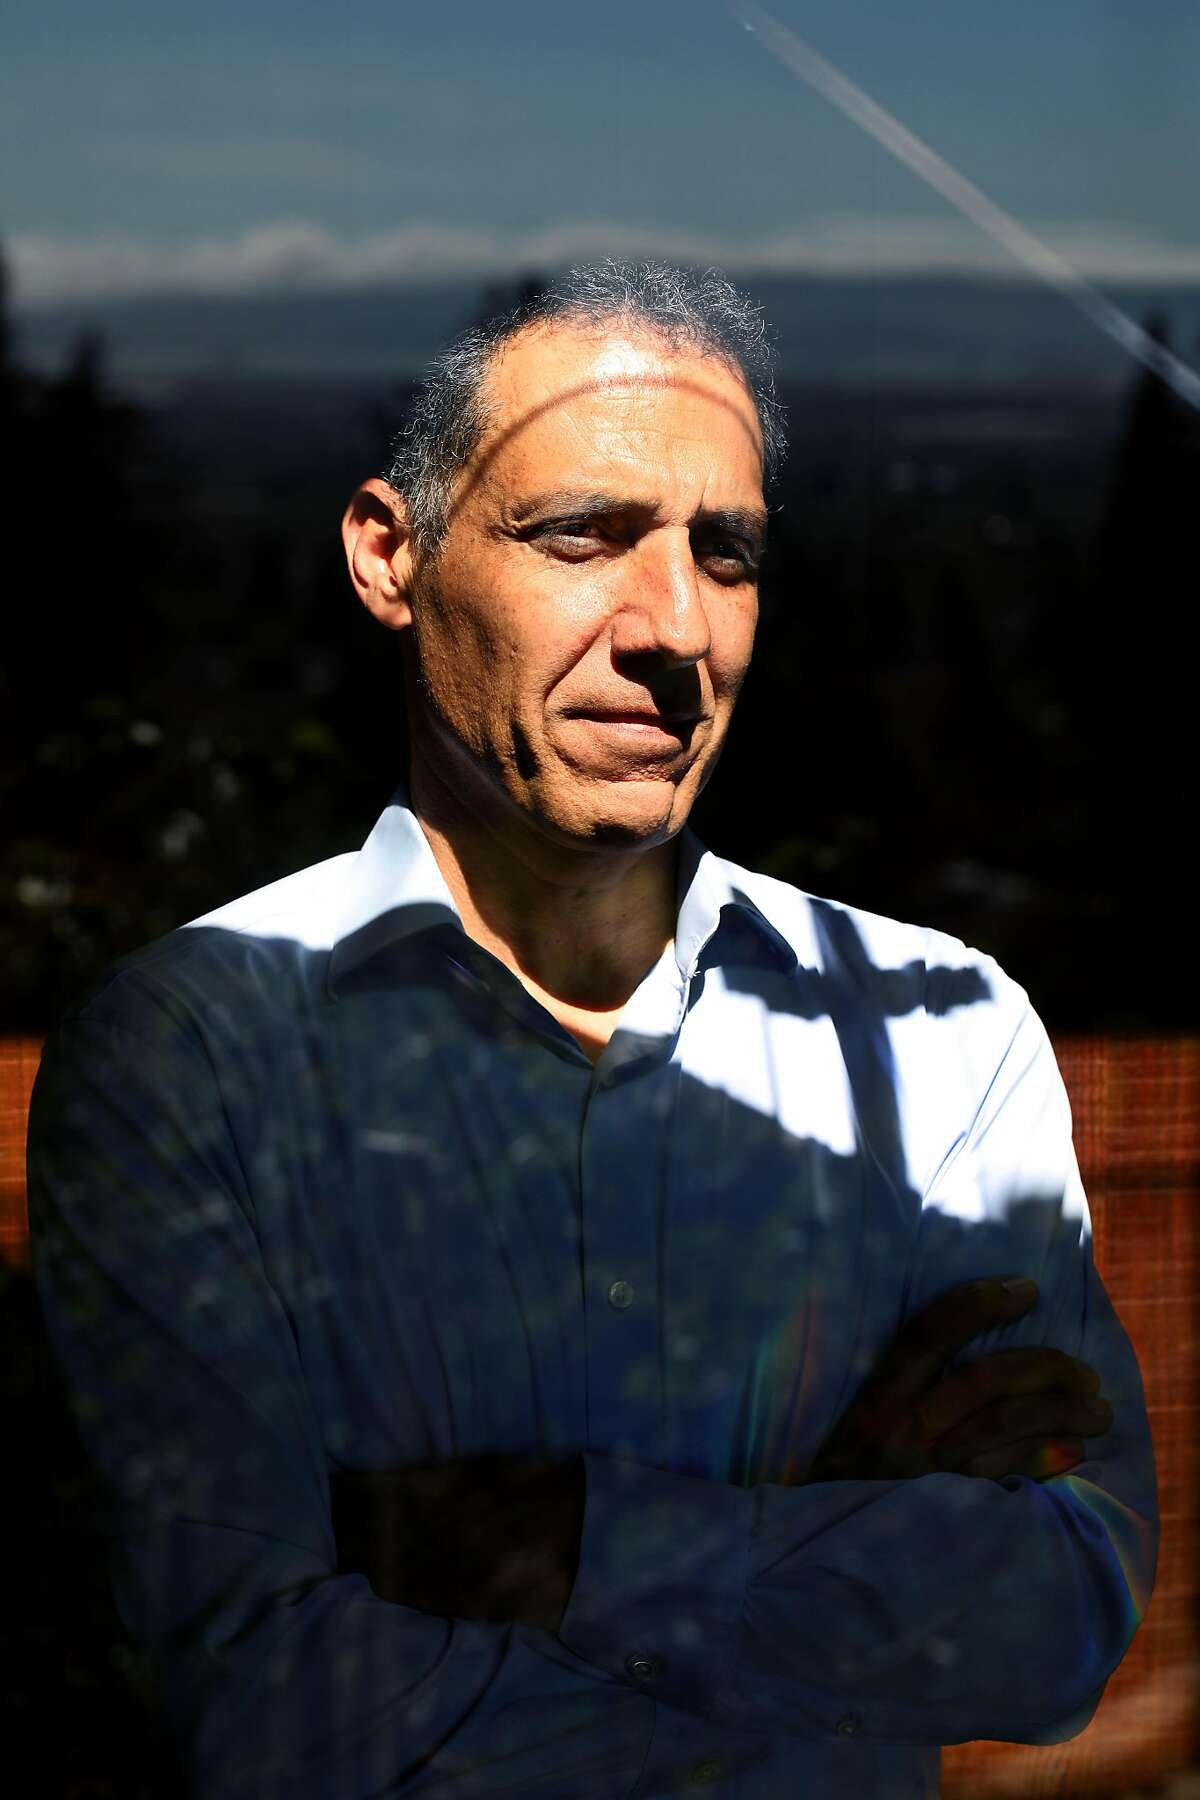 Professor Hany Farid poses for a portrait in his home on Wednesday, April 22, 2020, in Berkeley, Calif. Prof. Farid is doing a huge survey related to conspiracies and the coronavirus. He's done work with Facebook and Twitter in the past to combat this kind of thing.